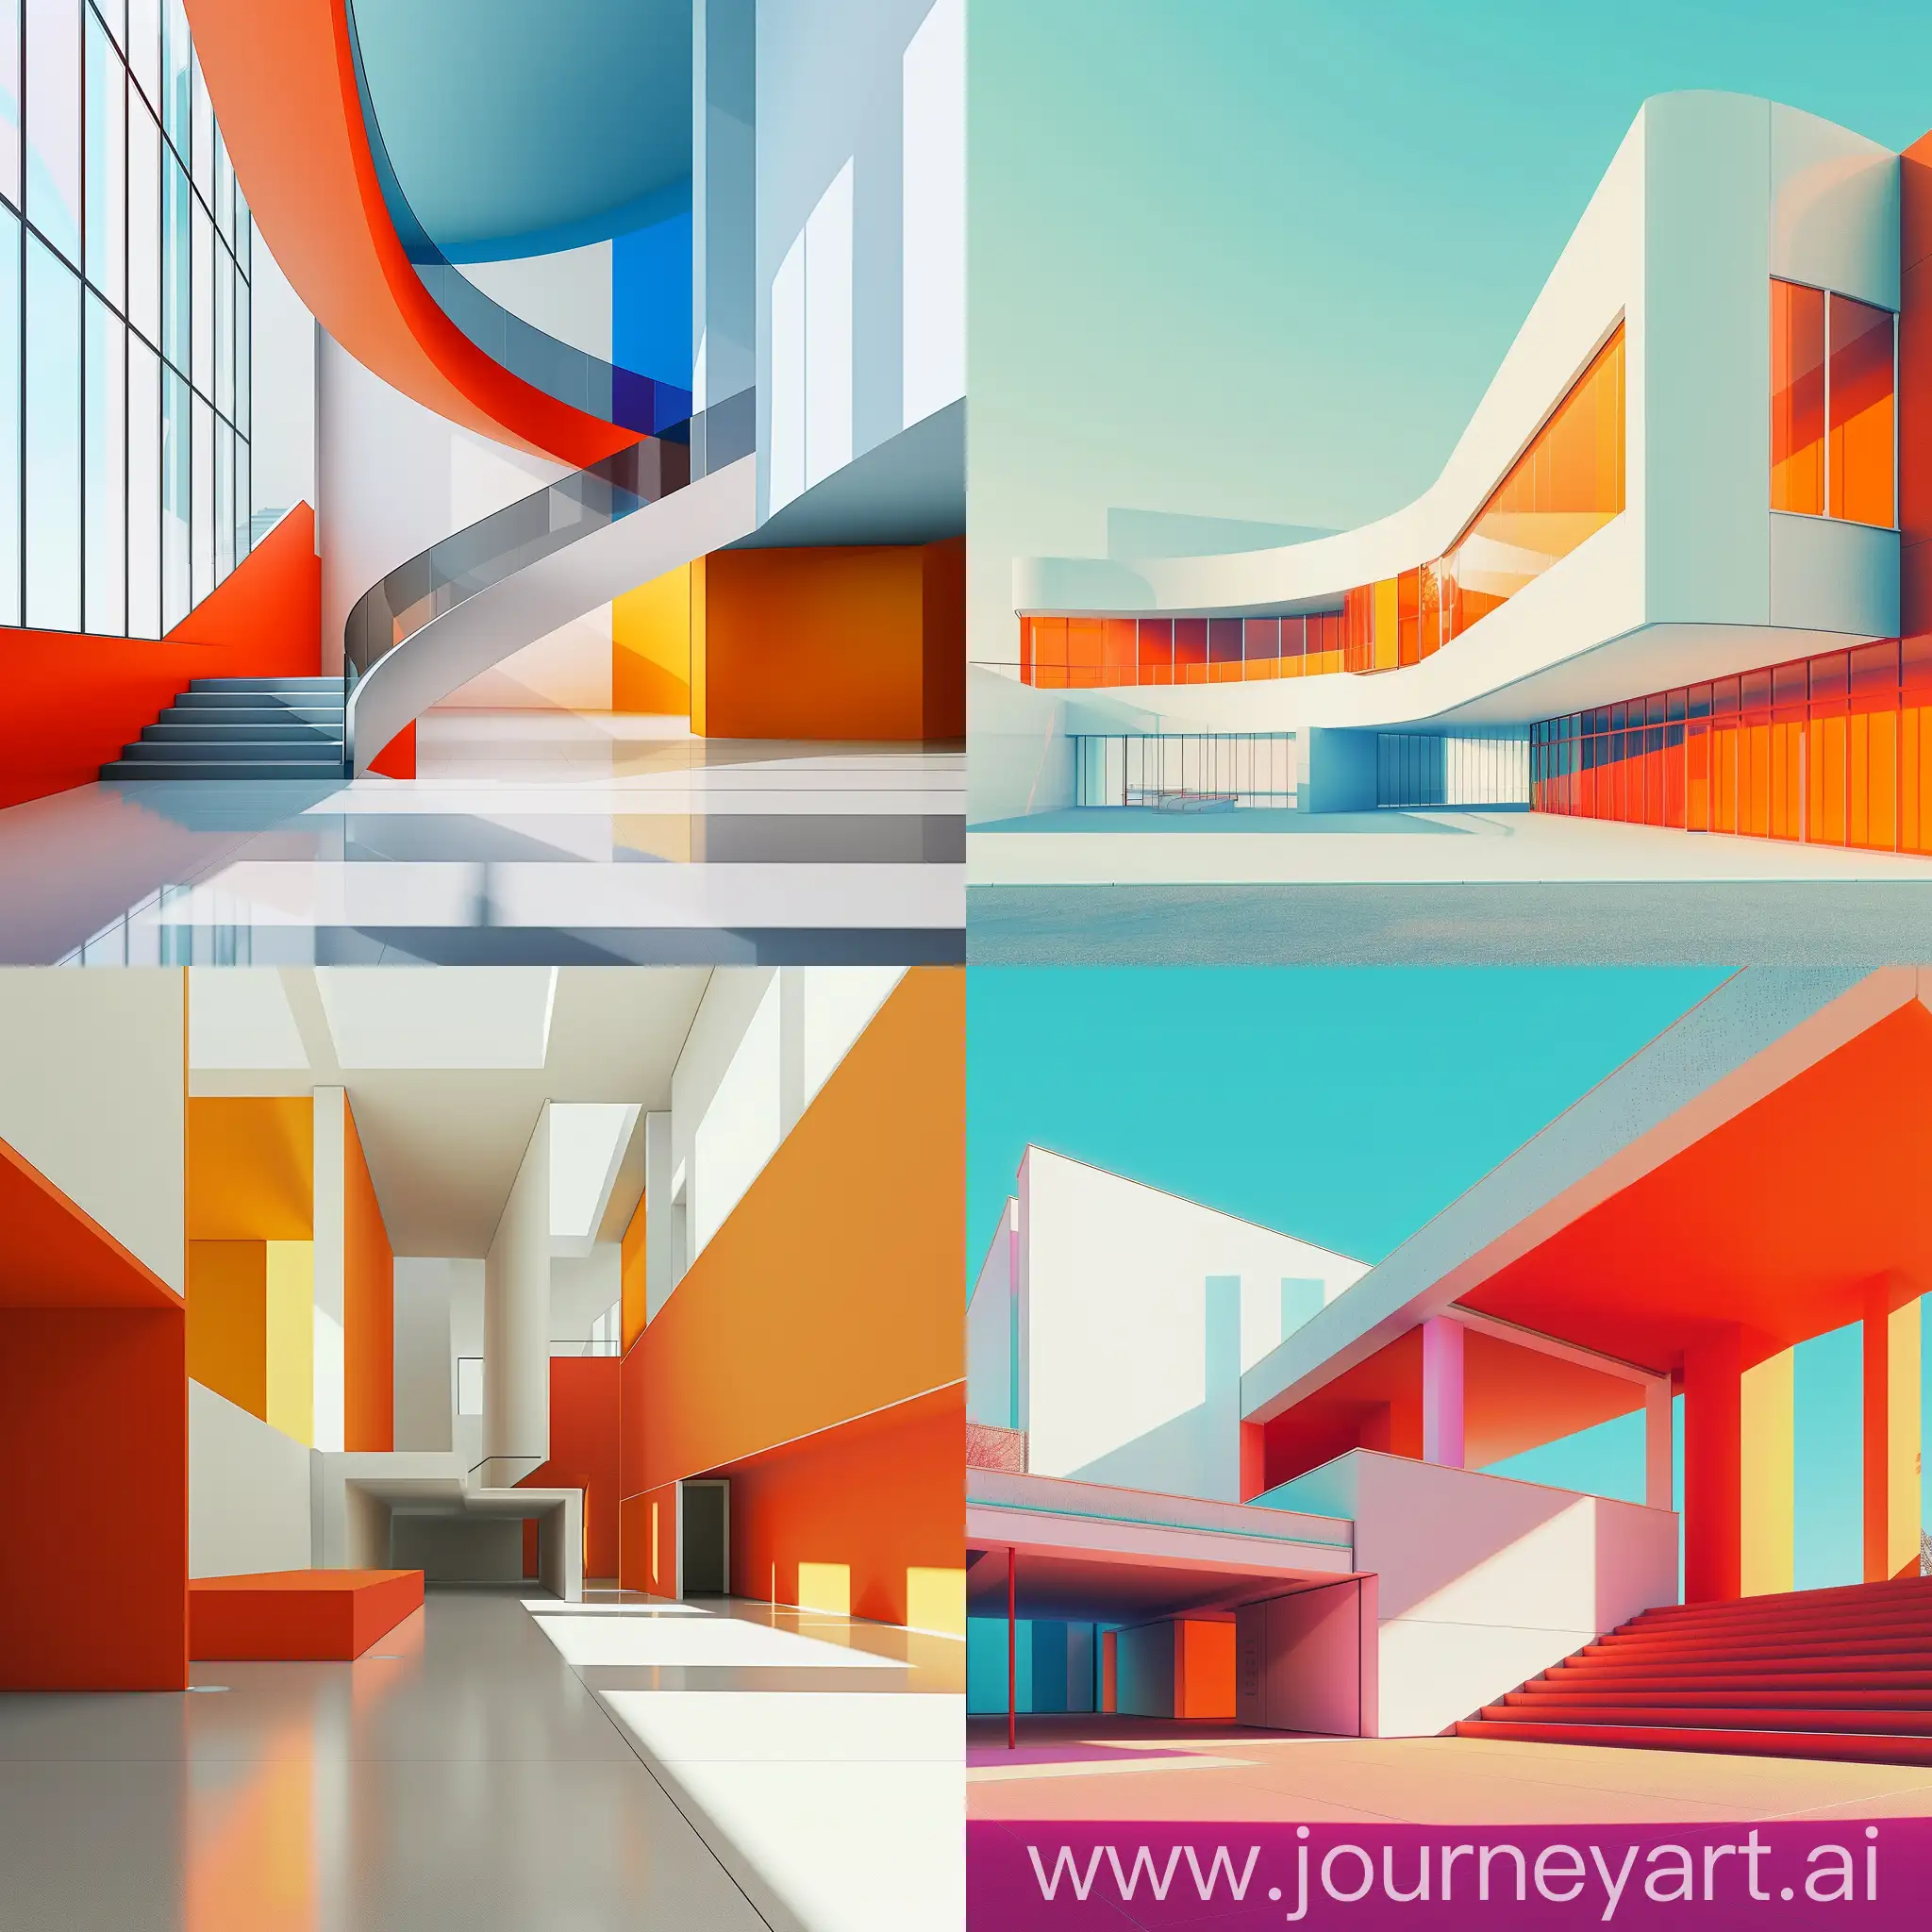 Create a photorealistic image of the modern museum in a classic and minimalistic design in bright colors